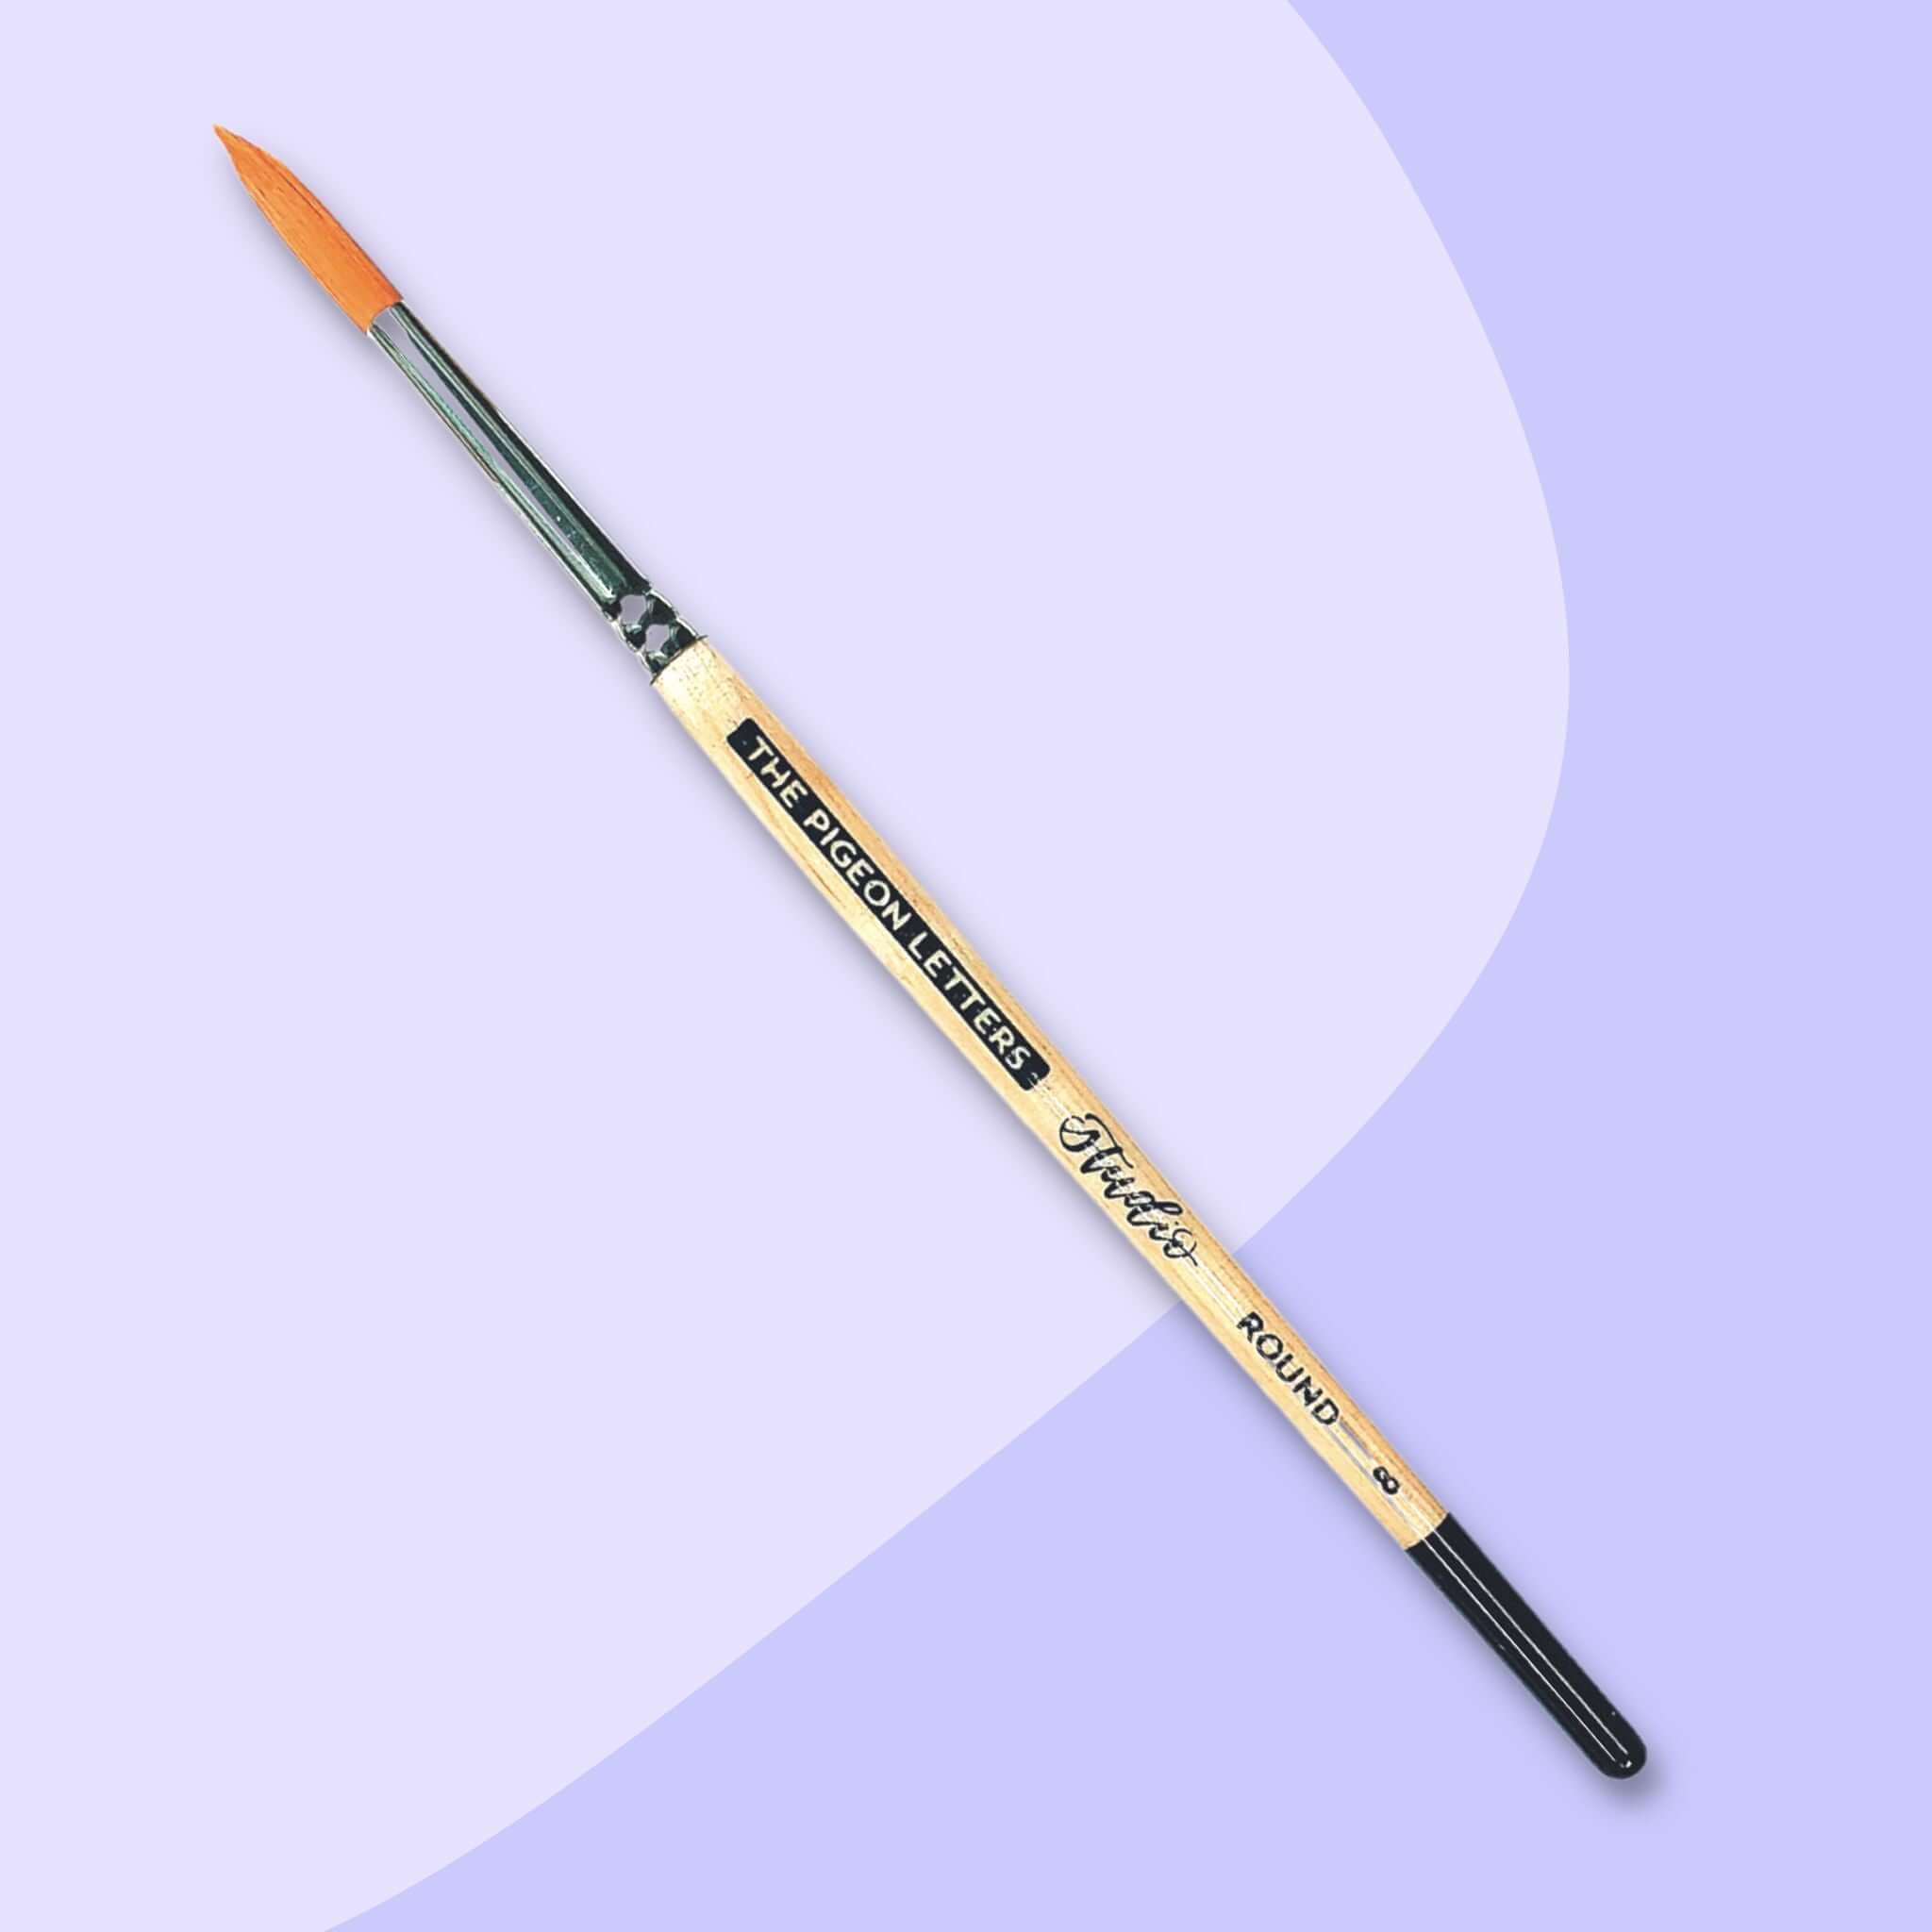 Large watercolor brush with synthetic brisltes